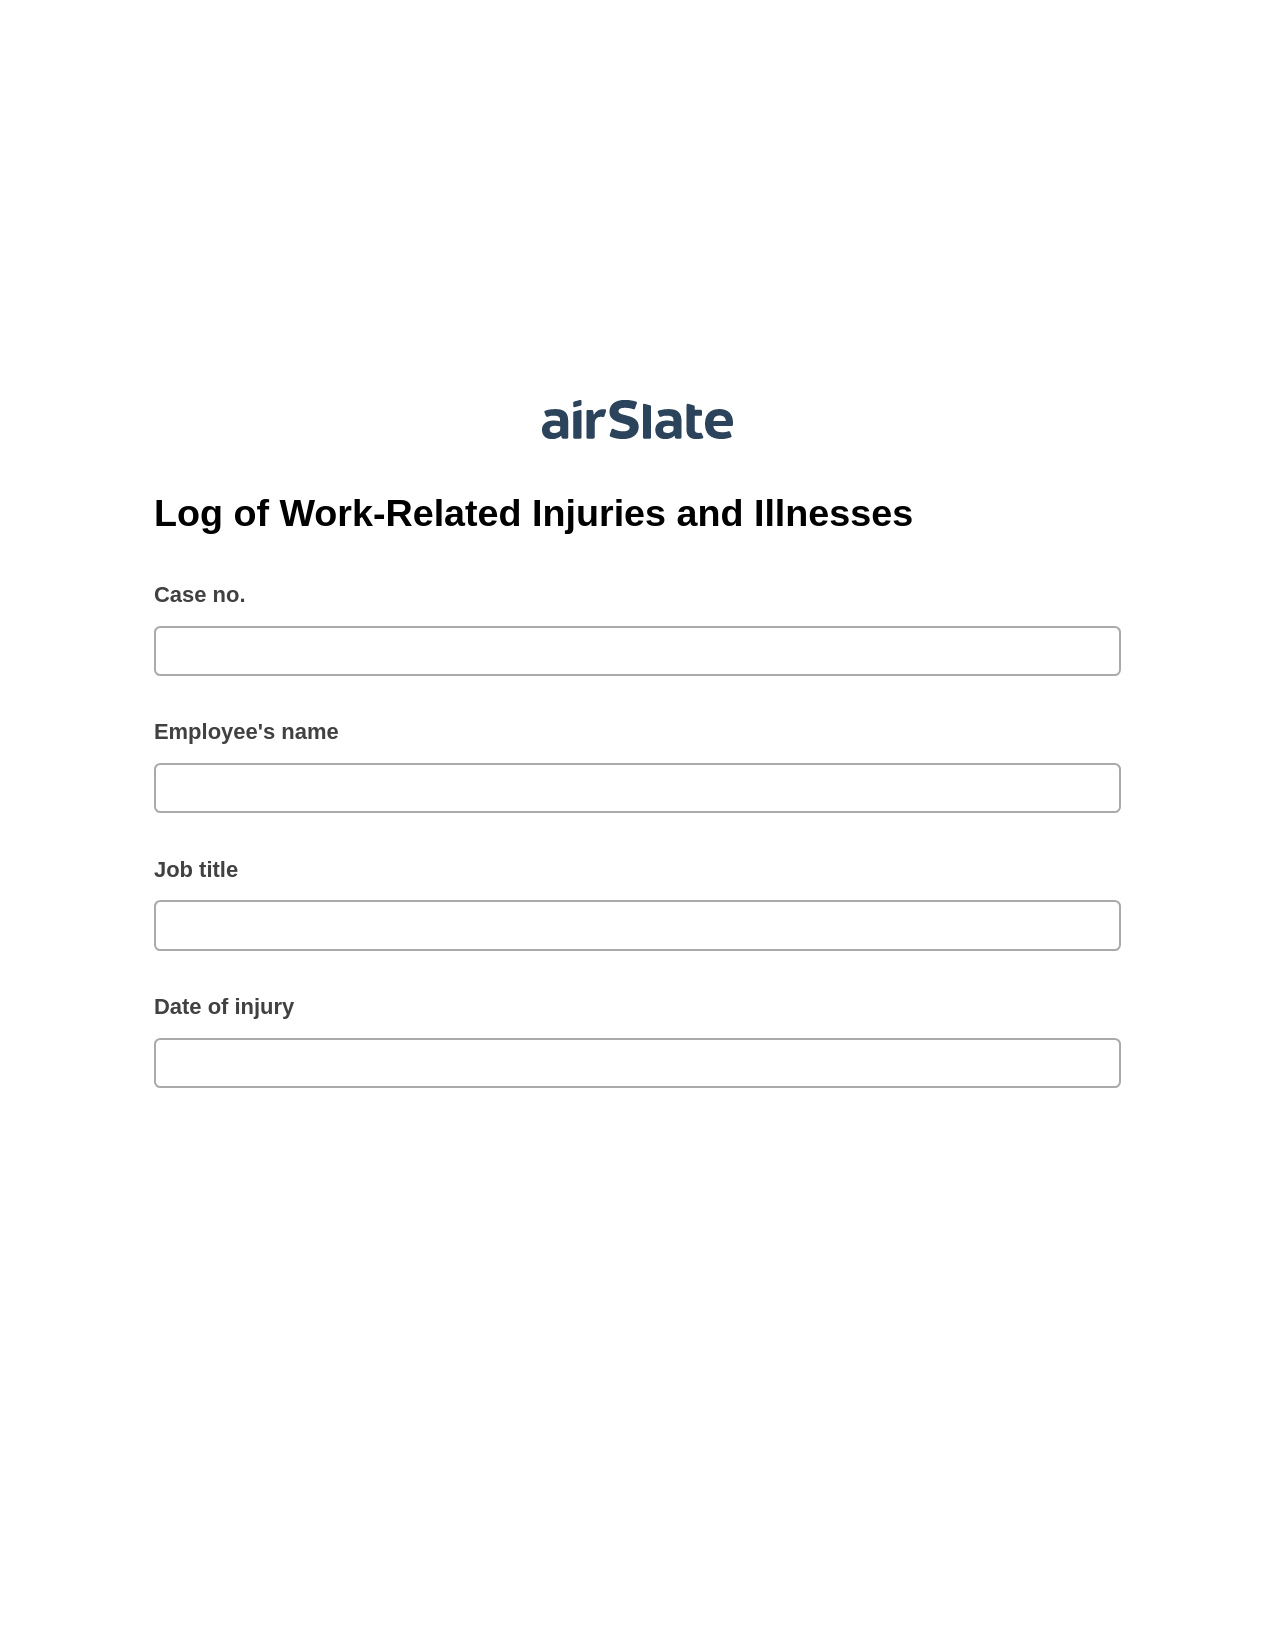 Multirole Log of Work-Related Injuries and Illnesses Pre-fill from another Slate Bot, Create Salesforce Record Bot, Slack Notification Postfinish Bot